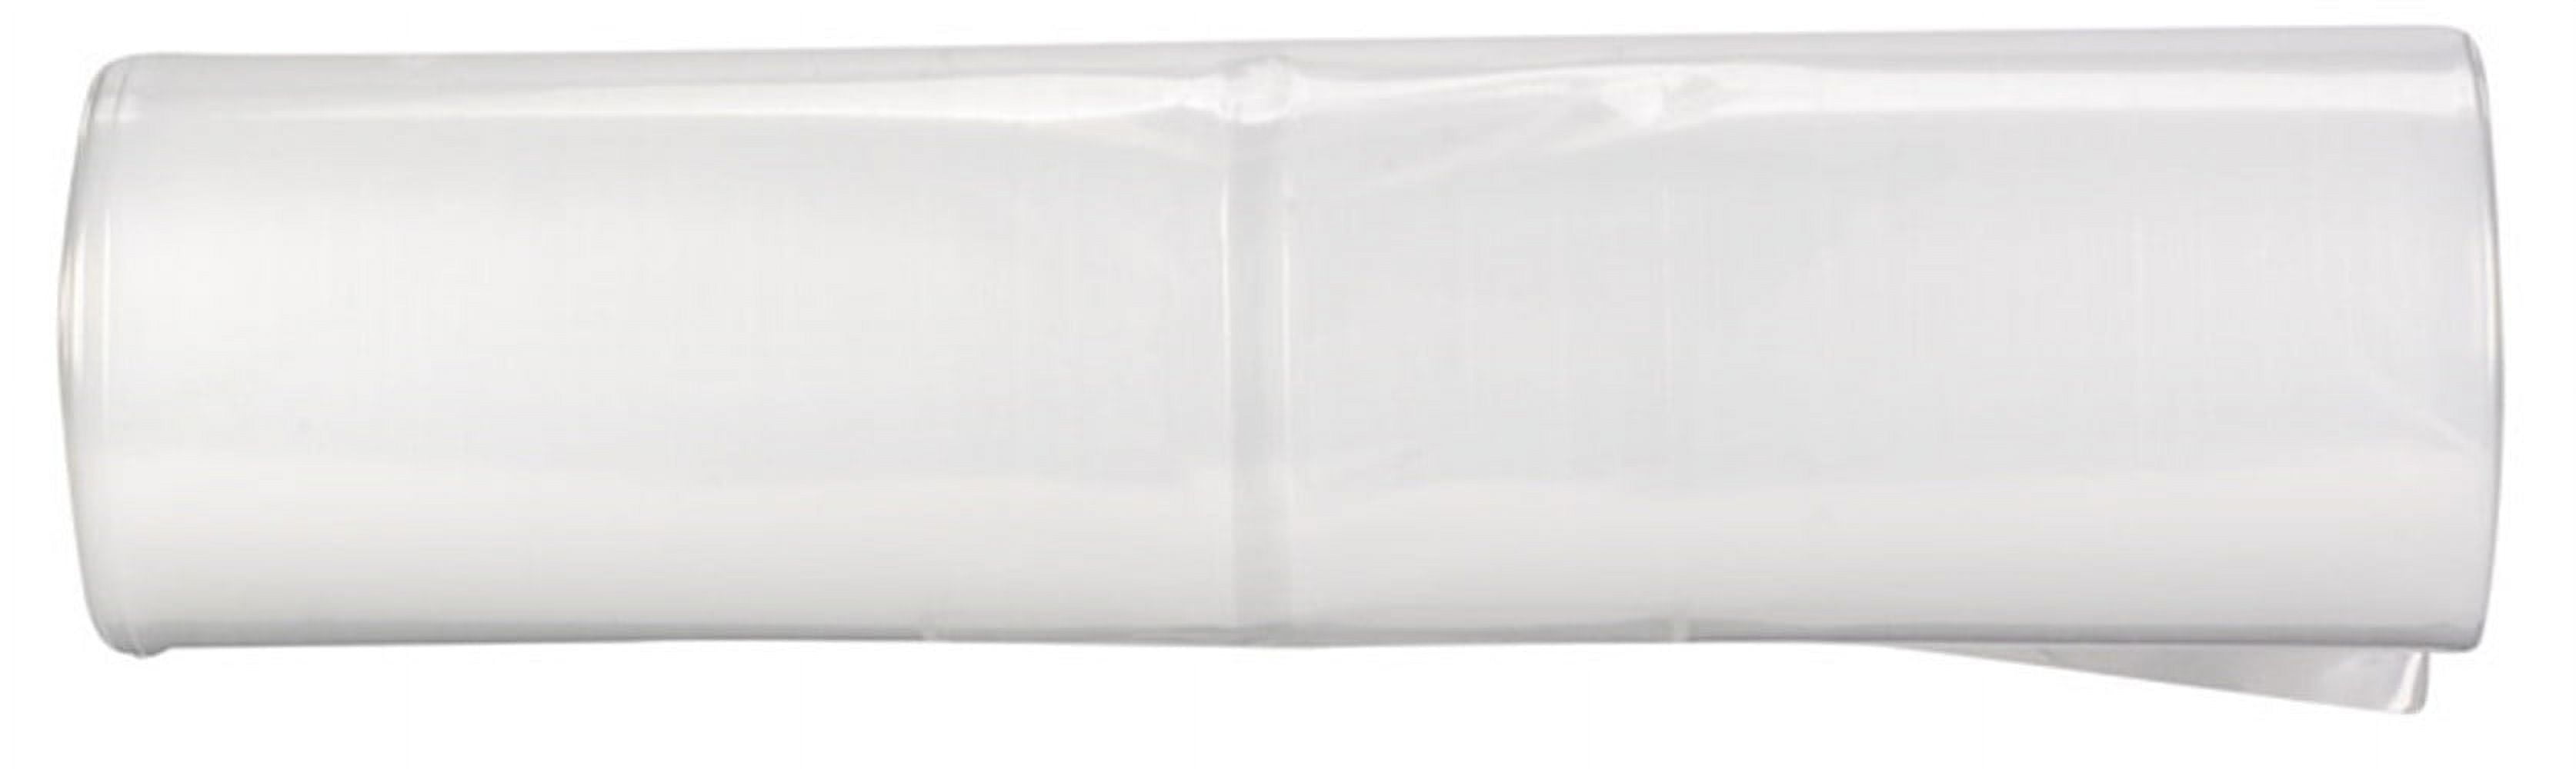 Picture of Berry Plastics 626021 6 mil 8 x 100 ft. Film Polyethylene Sheeting - Clear